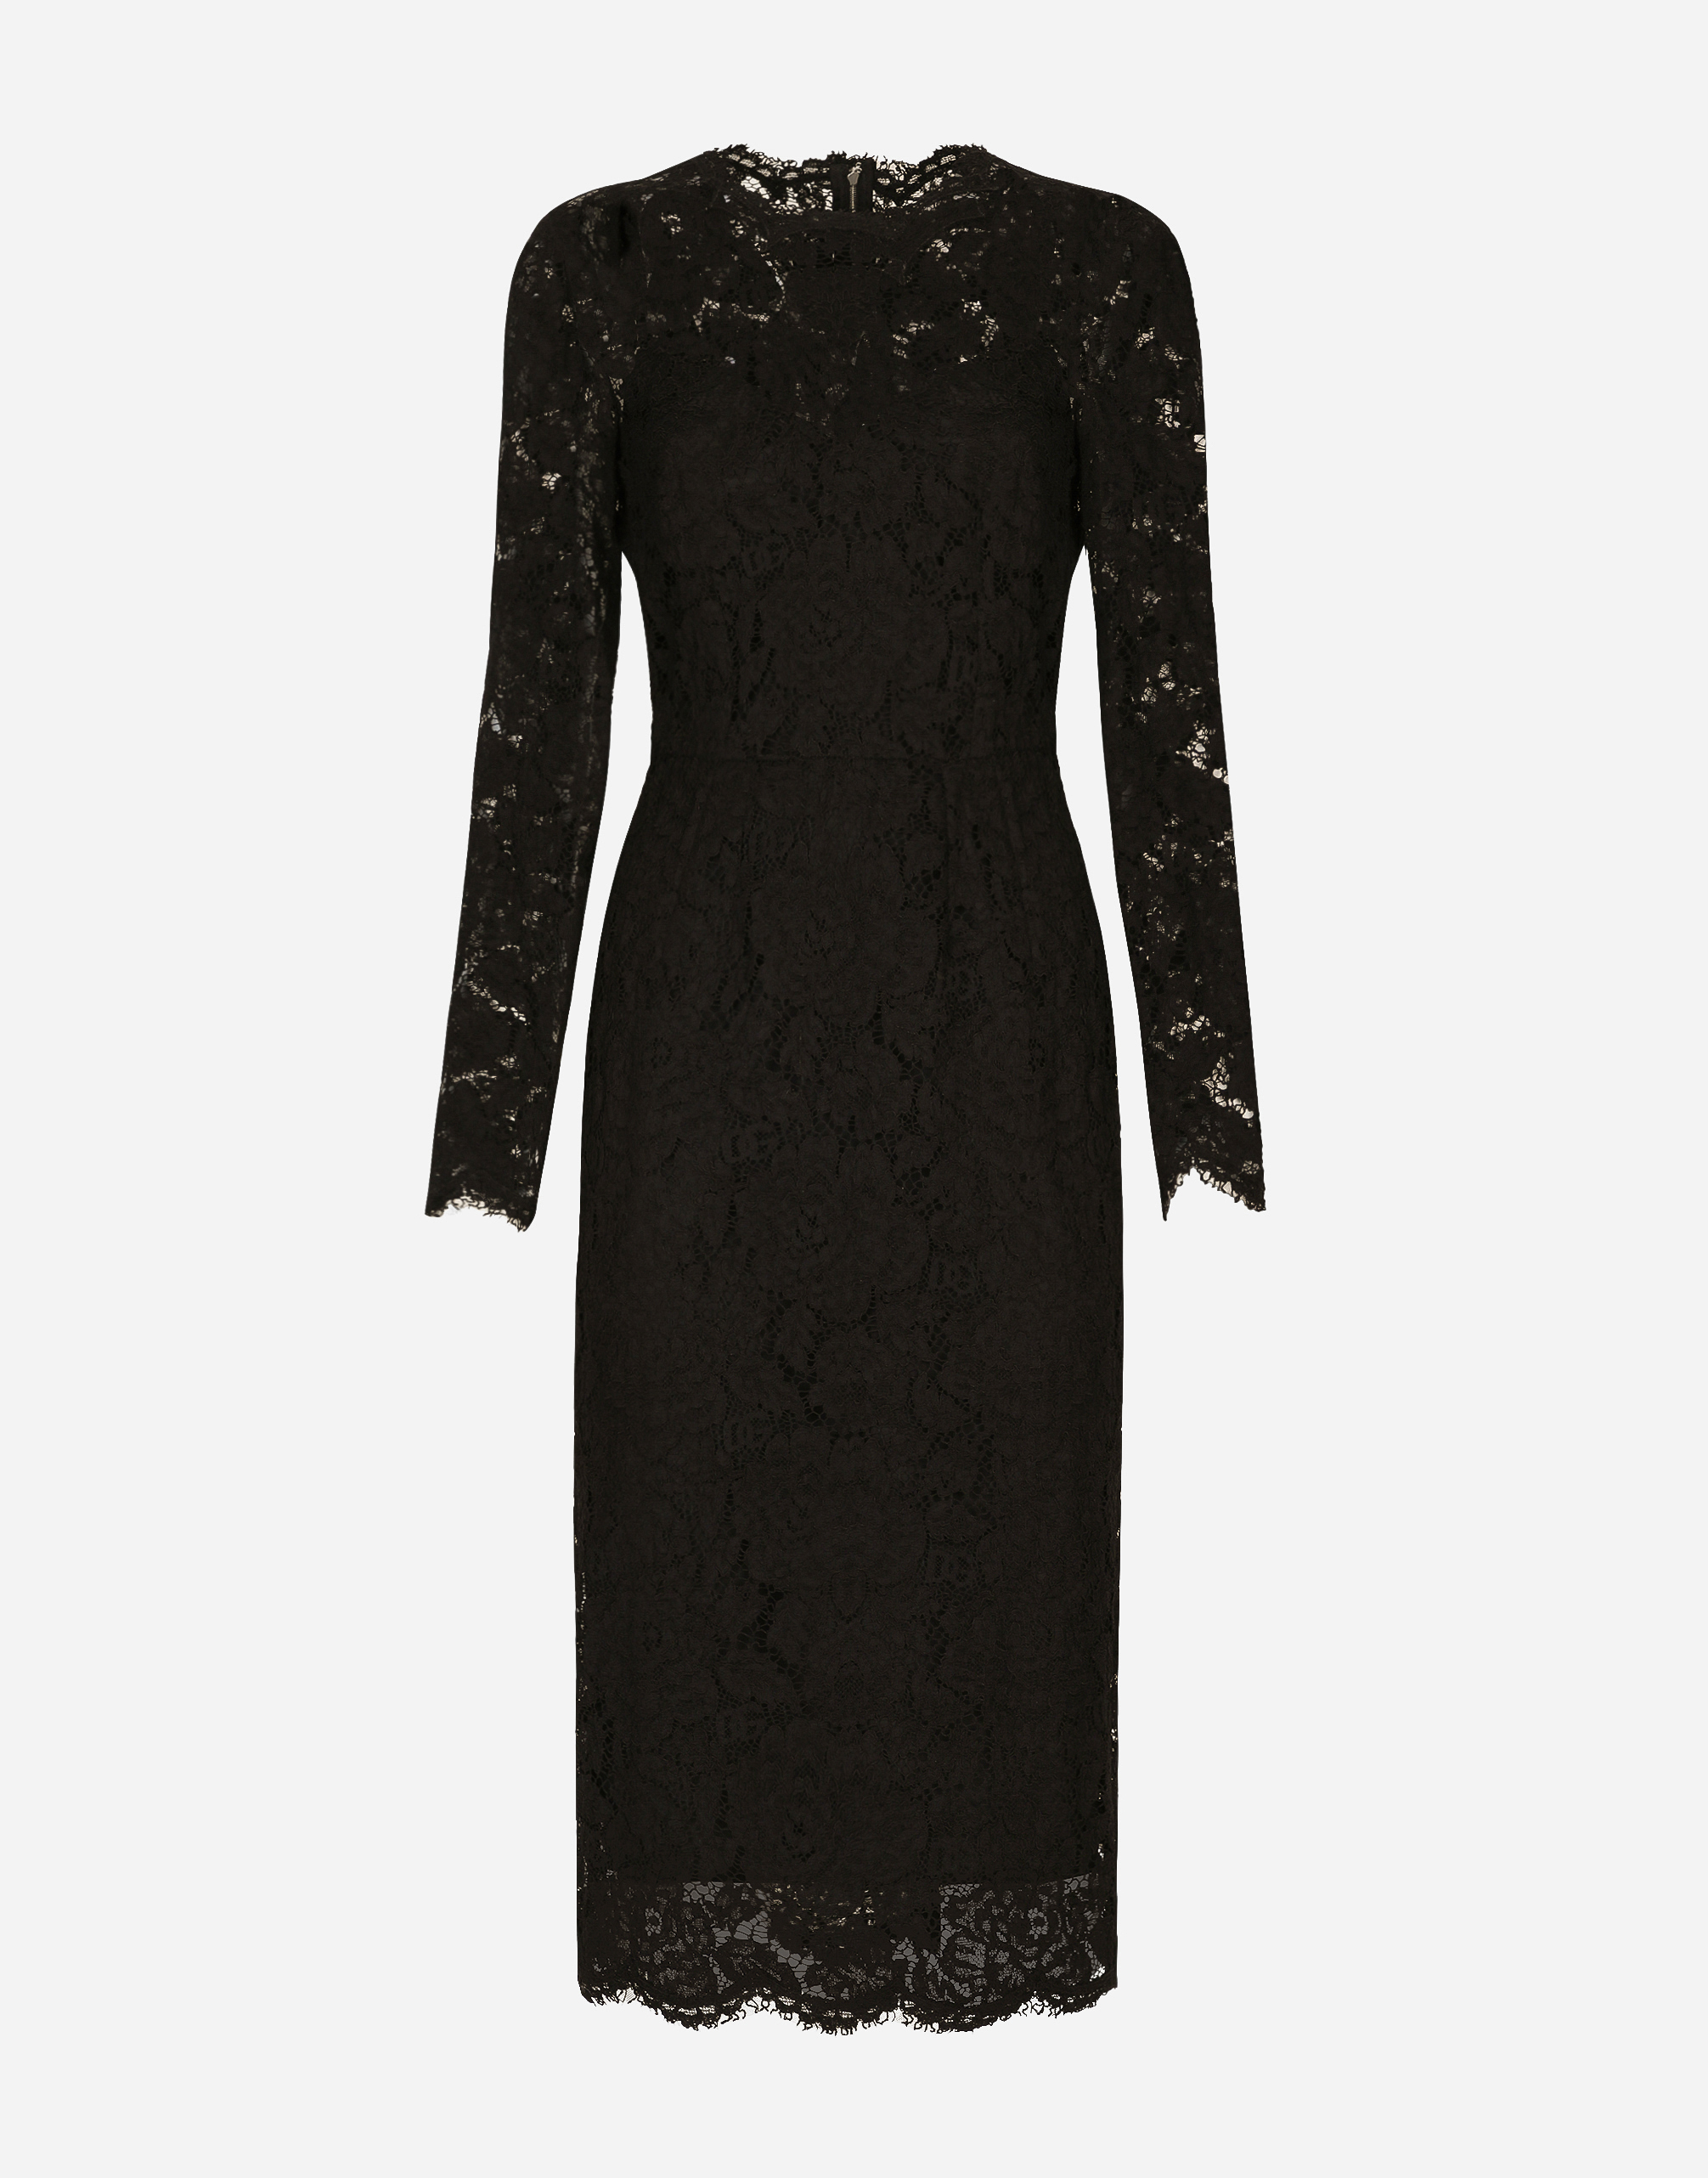 Long-sleeved calf-length dress in branded stretch lace in Black